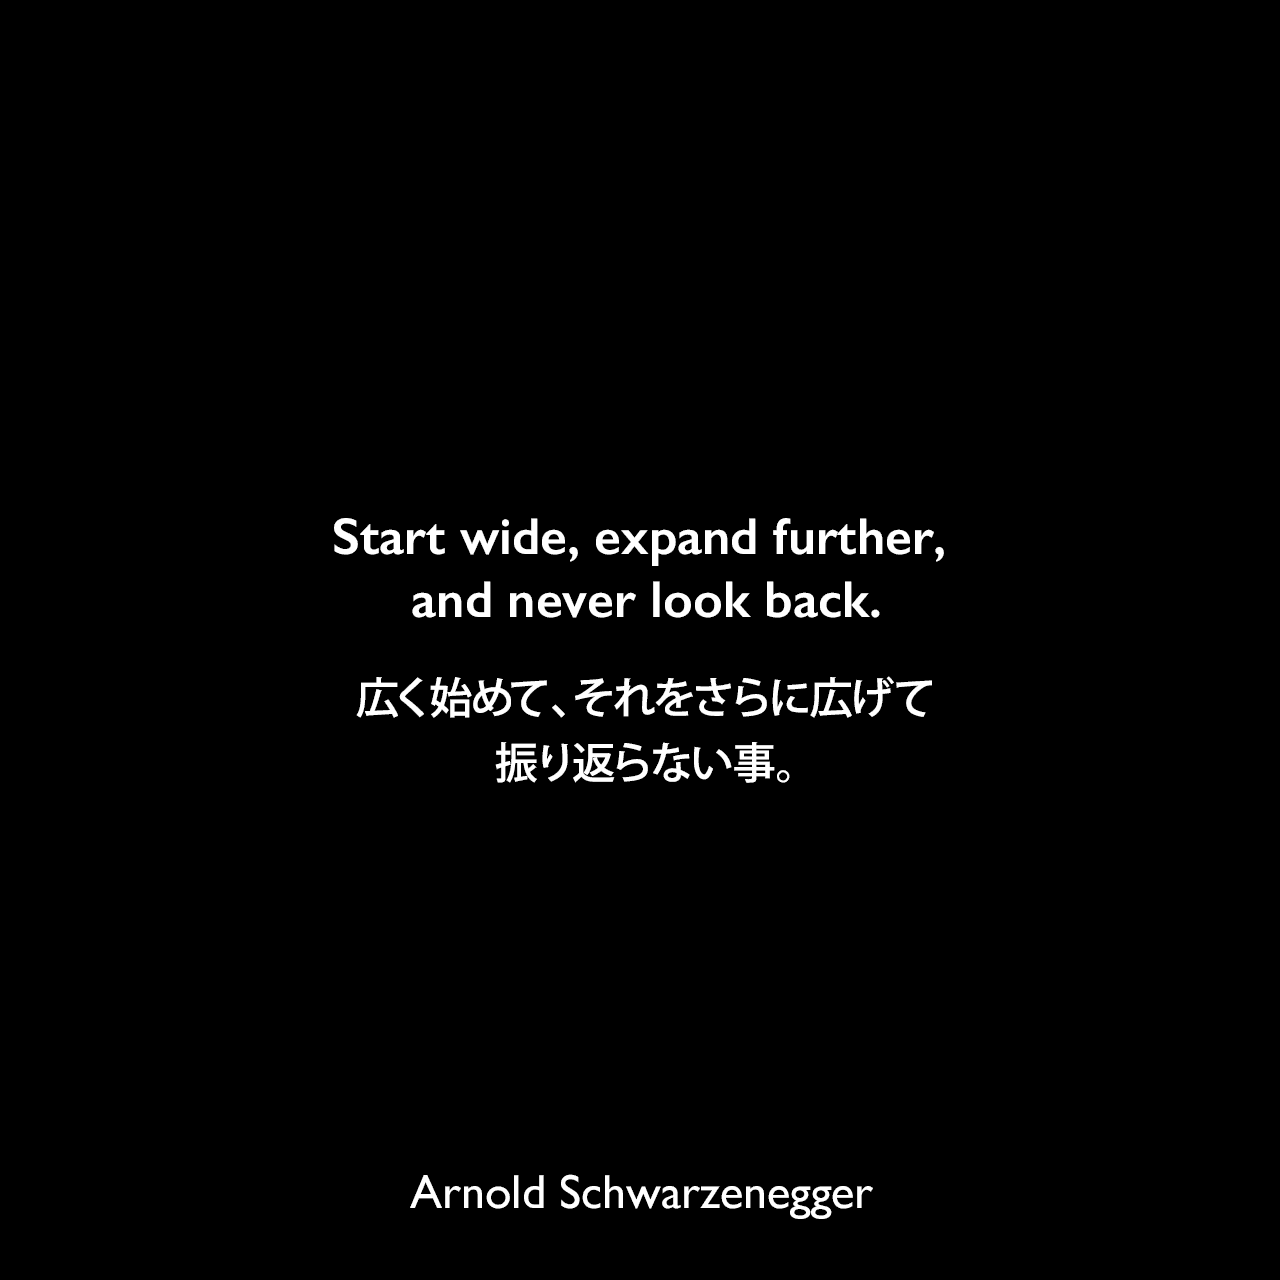 Start wide, expand further, and never look back.広く始めて、それをさらに広げて、振り返らない事。Arnold Schwarzenegger